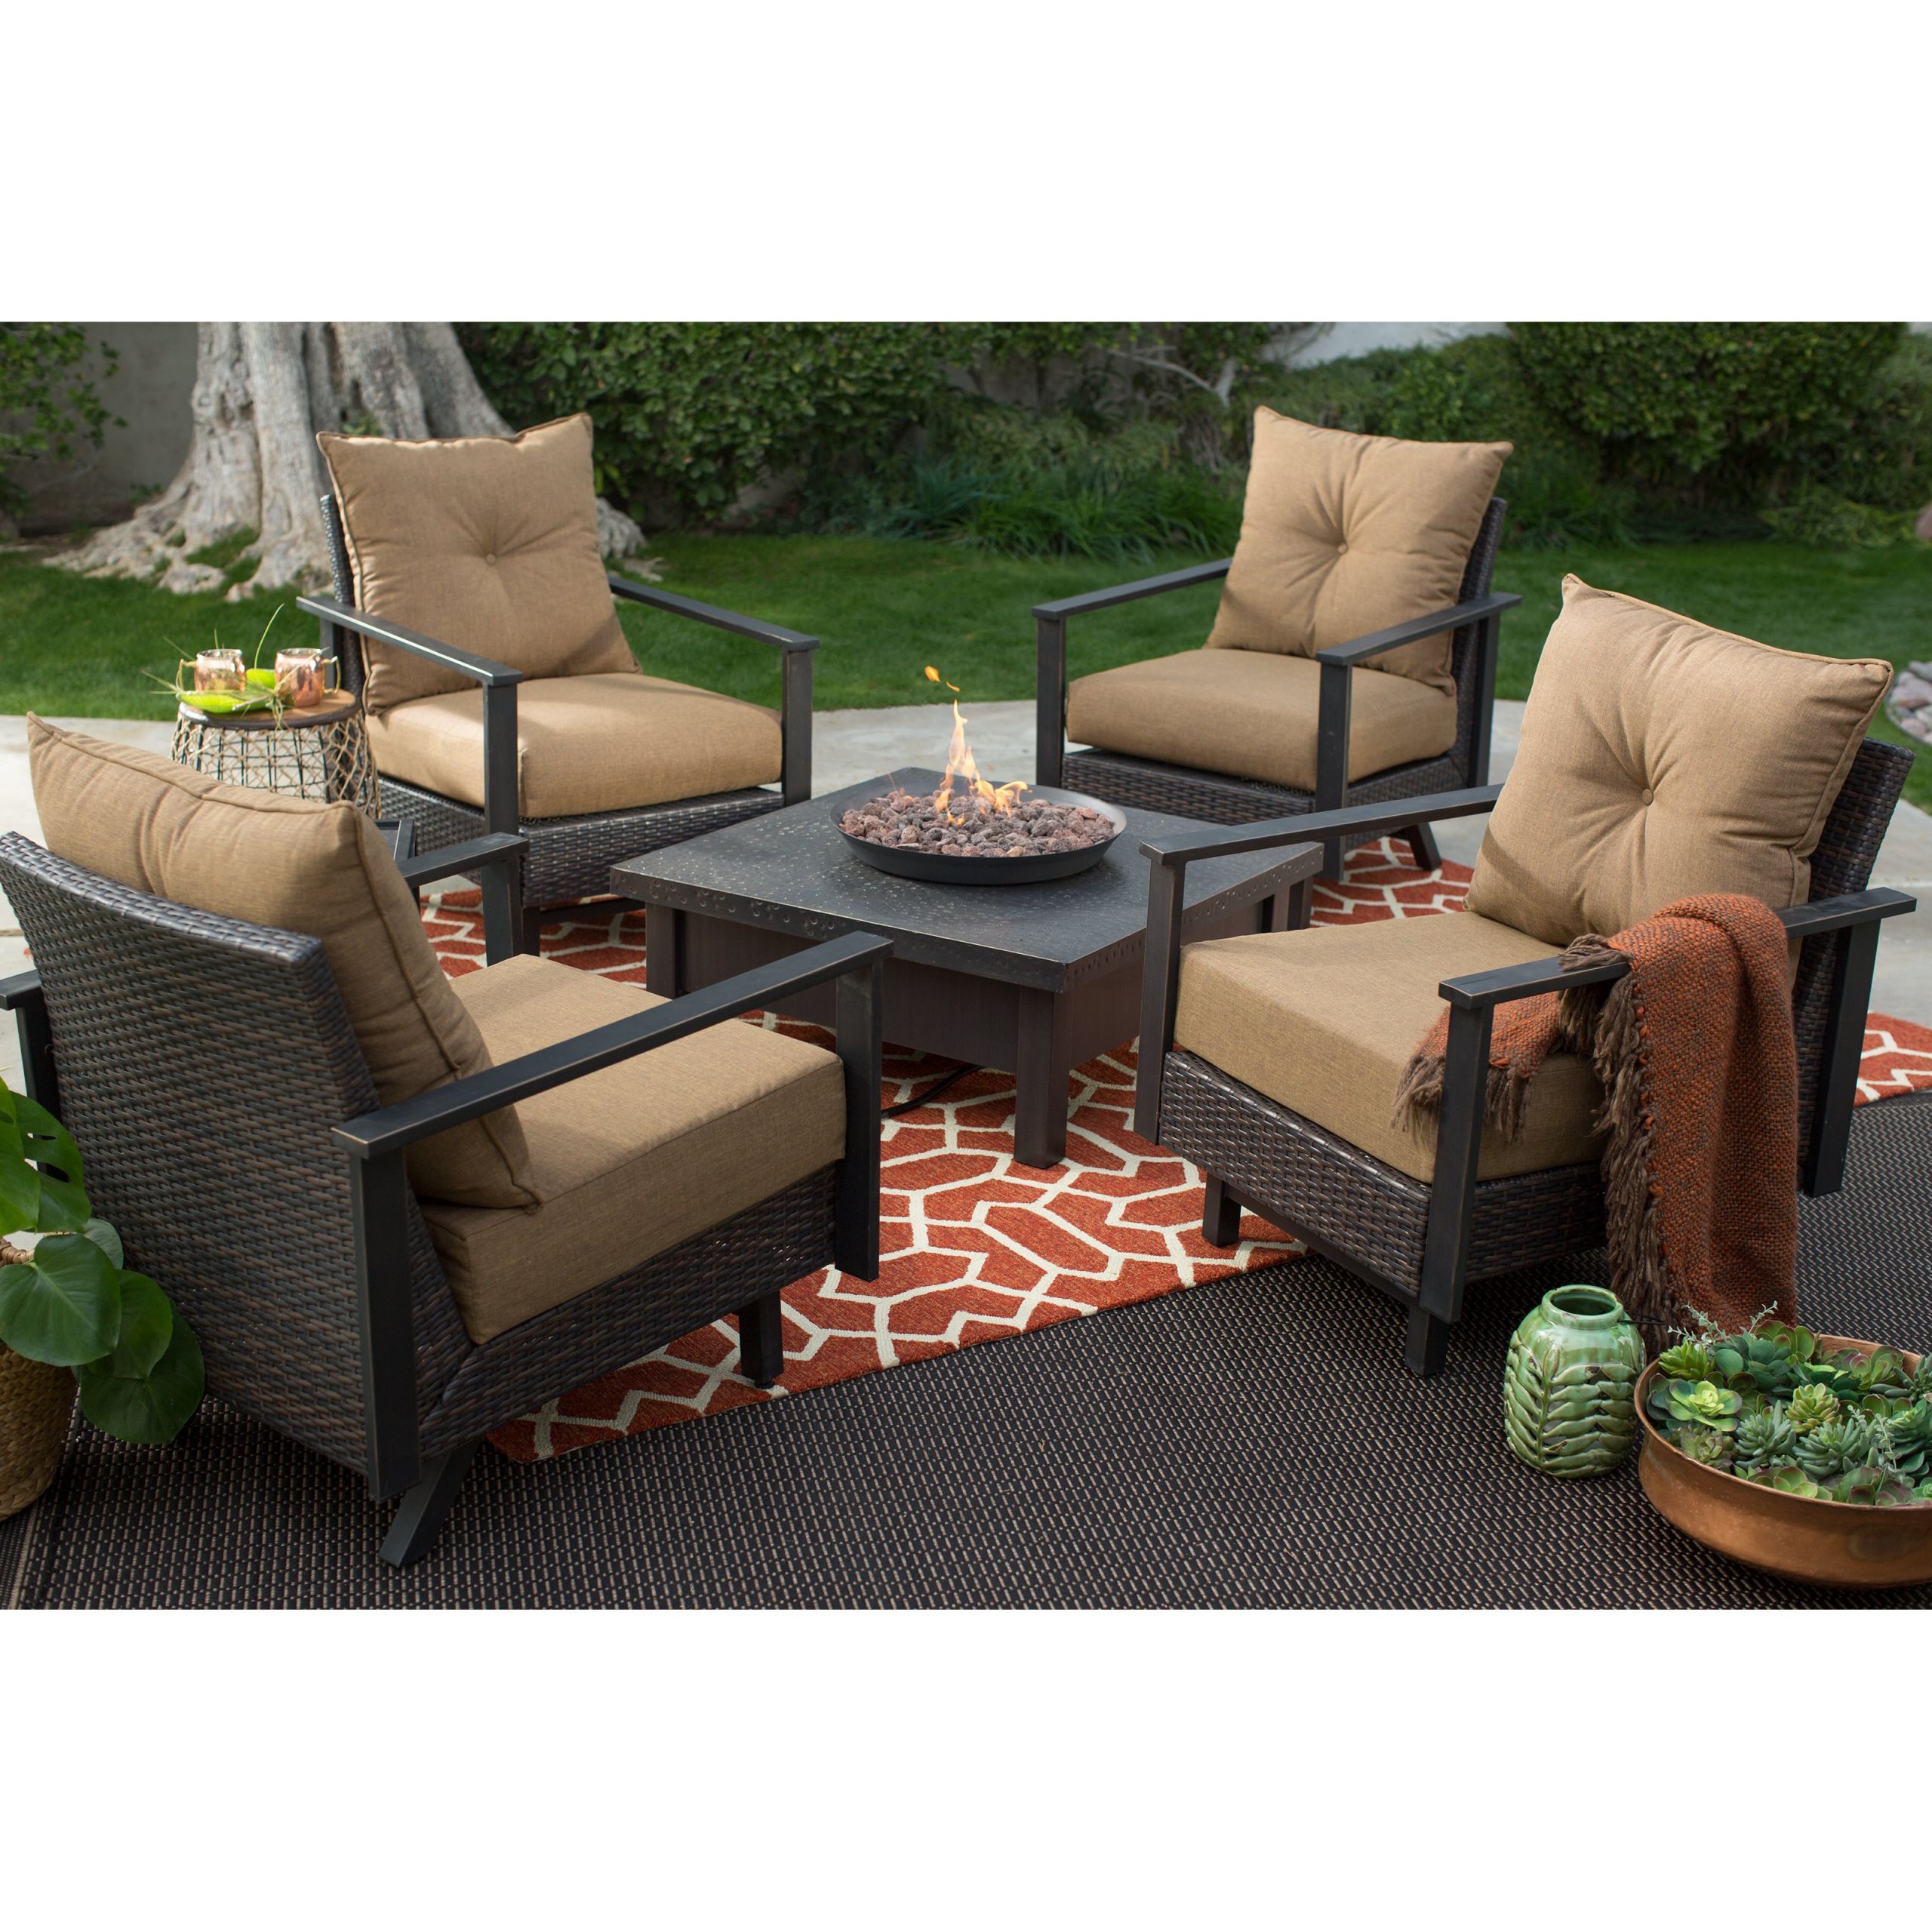 Patio Sets With Fire Pit
 Belham Living Livingston All Weather Wicker 6 Piece Fire